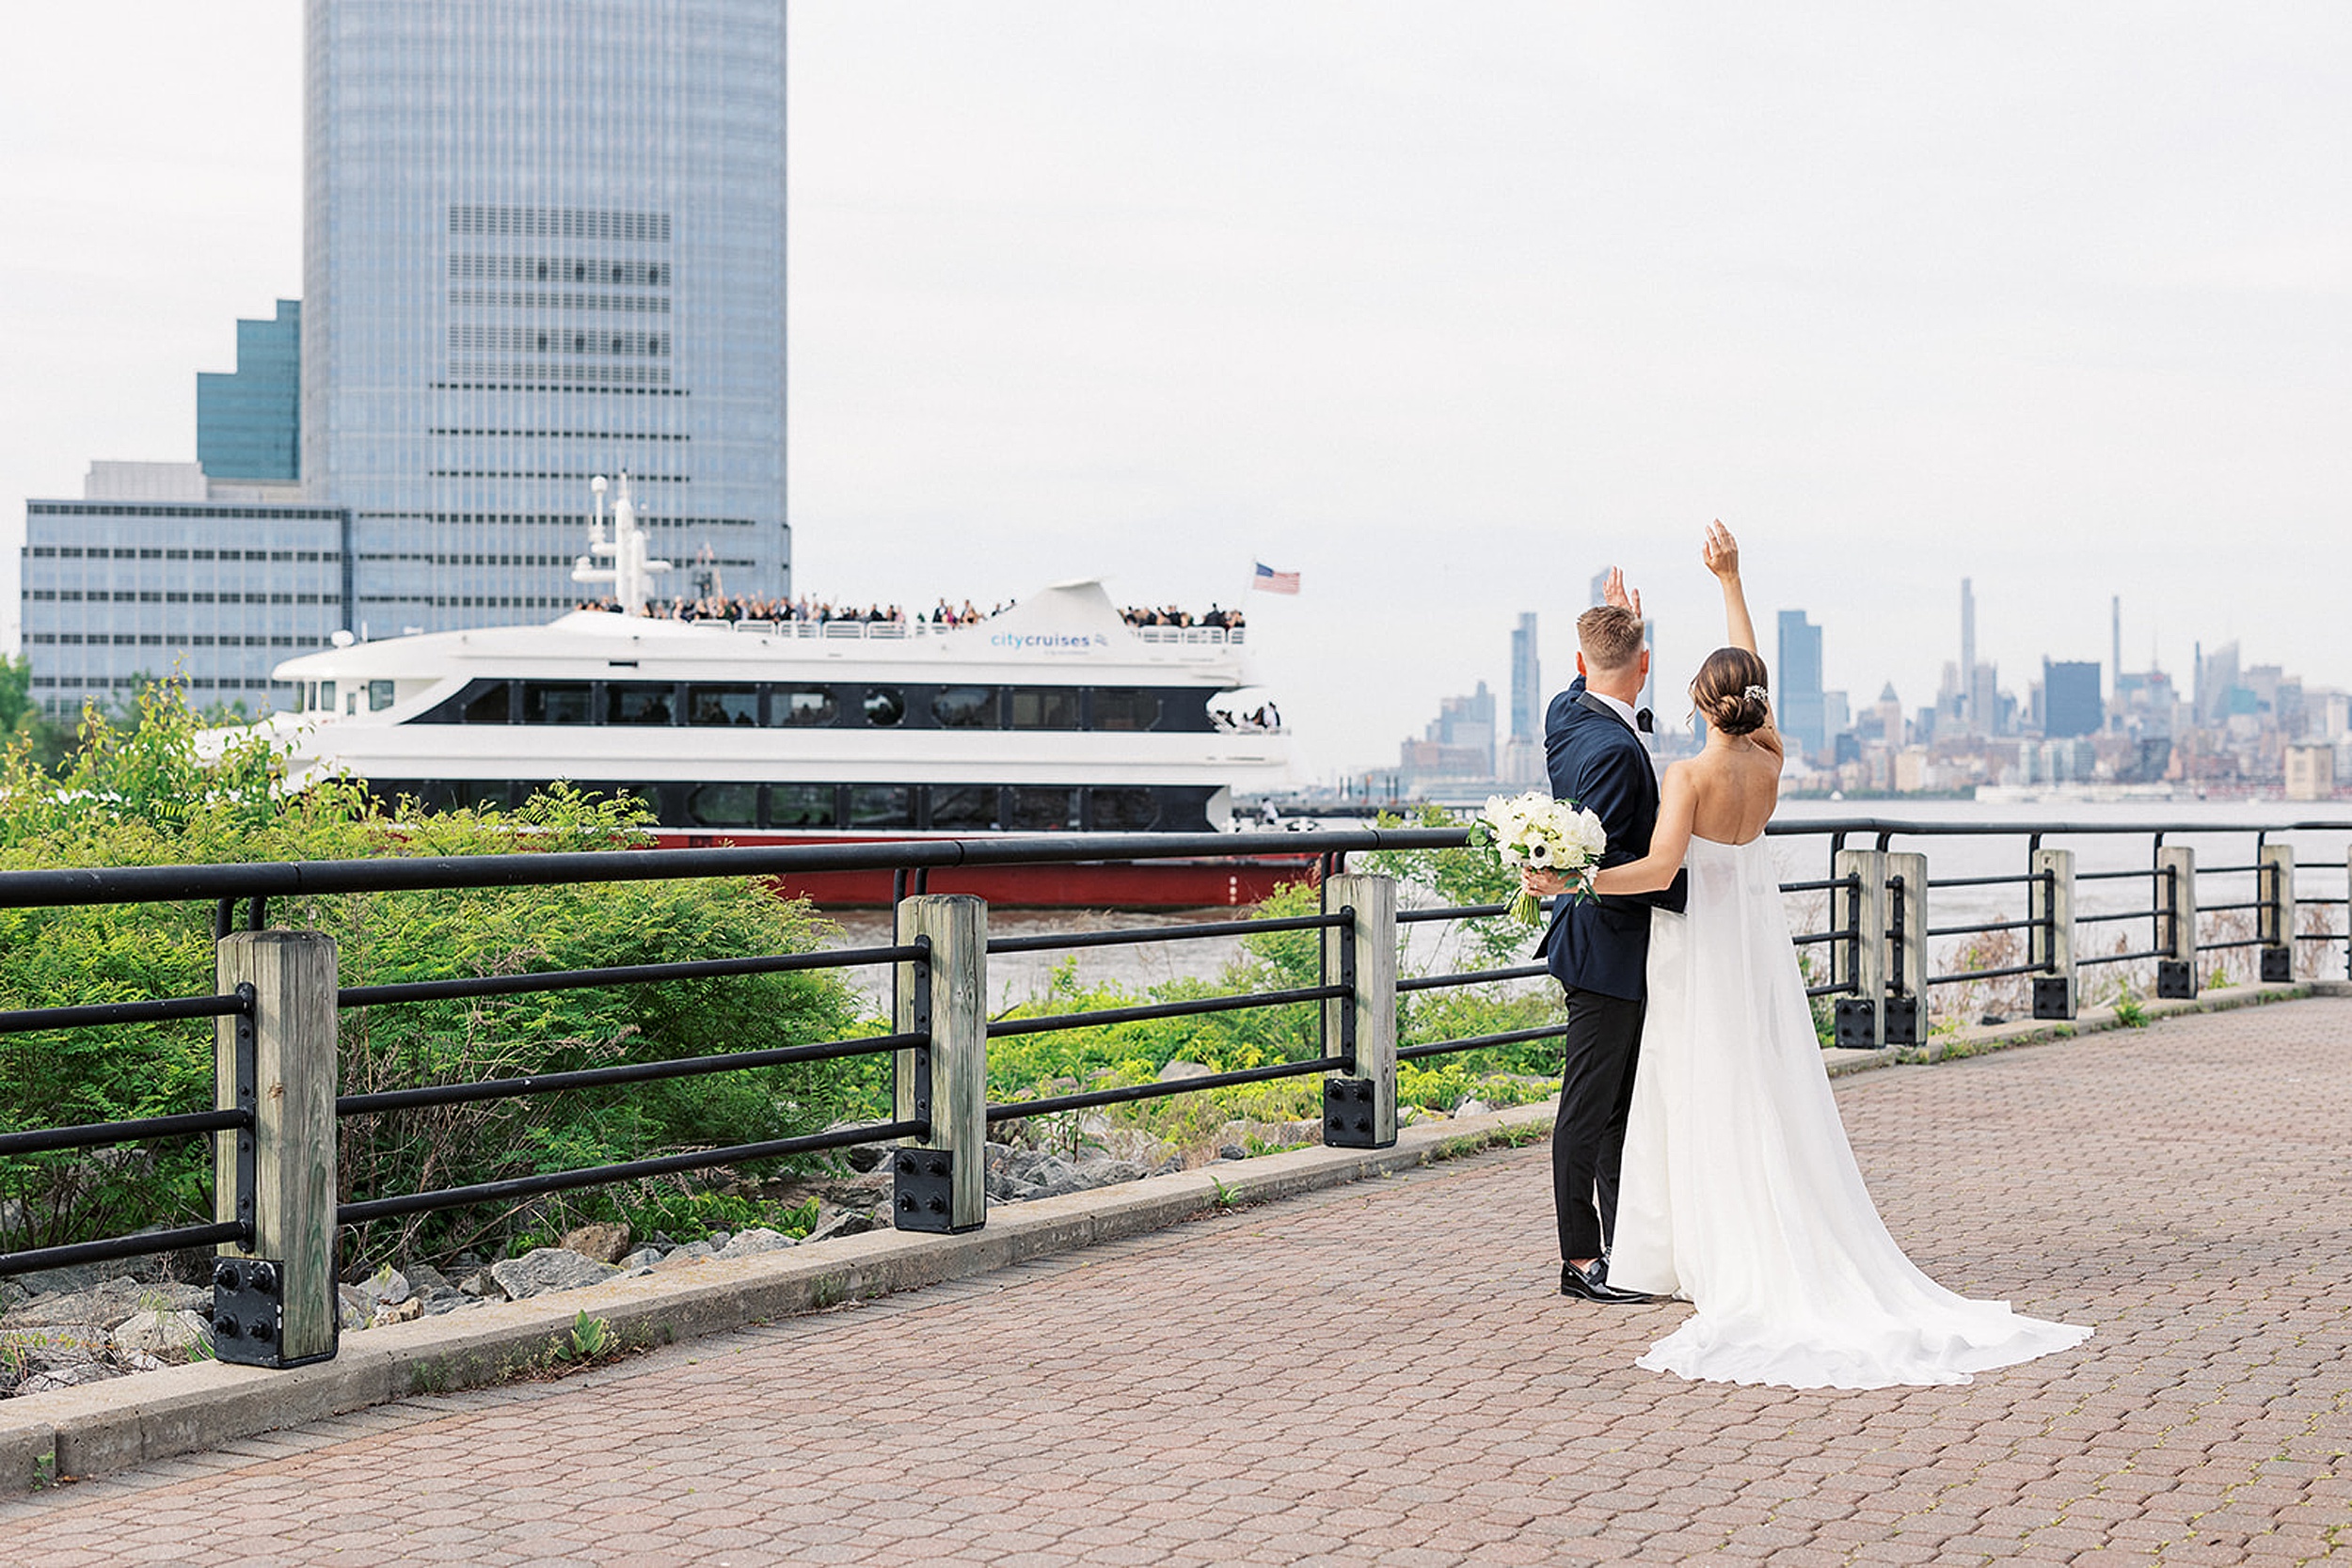 Newlyweds wave and to a city cruise boat that is cheering for them